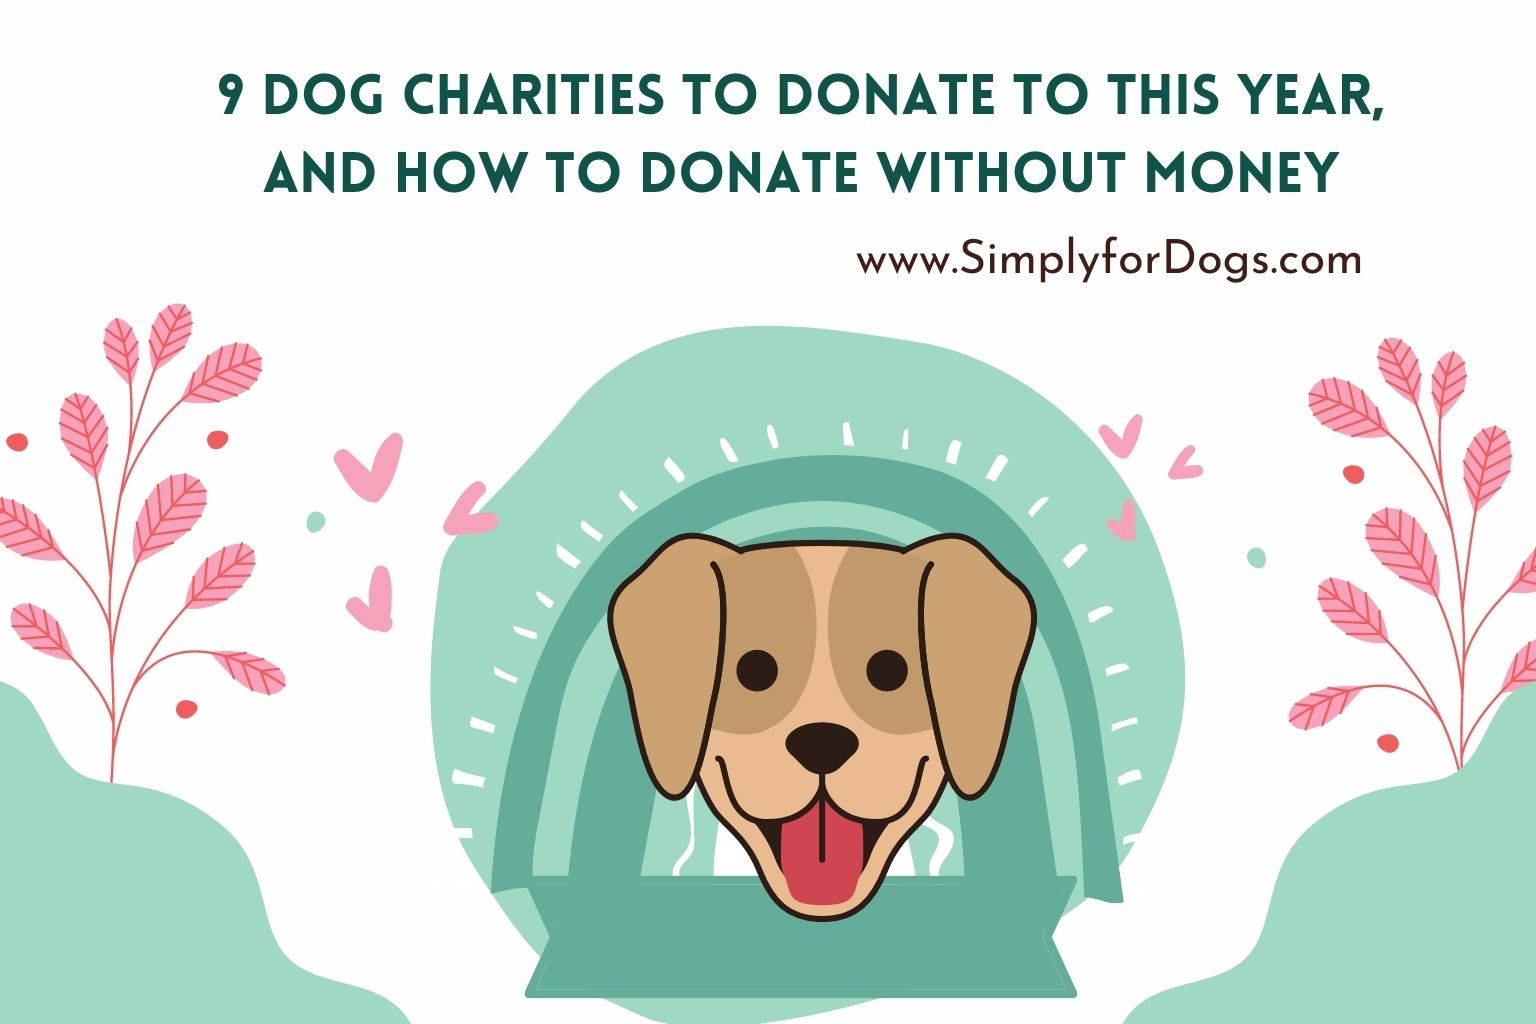 9 Dog Charities to Donate to This Year, and How to Donate without Money